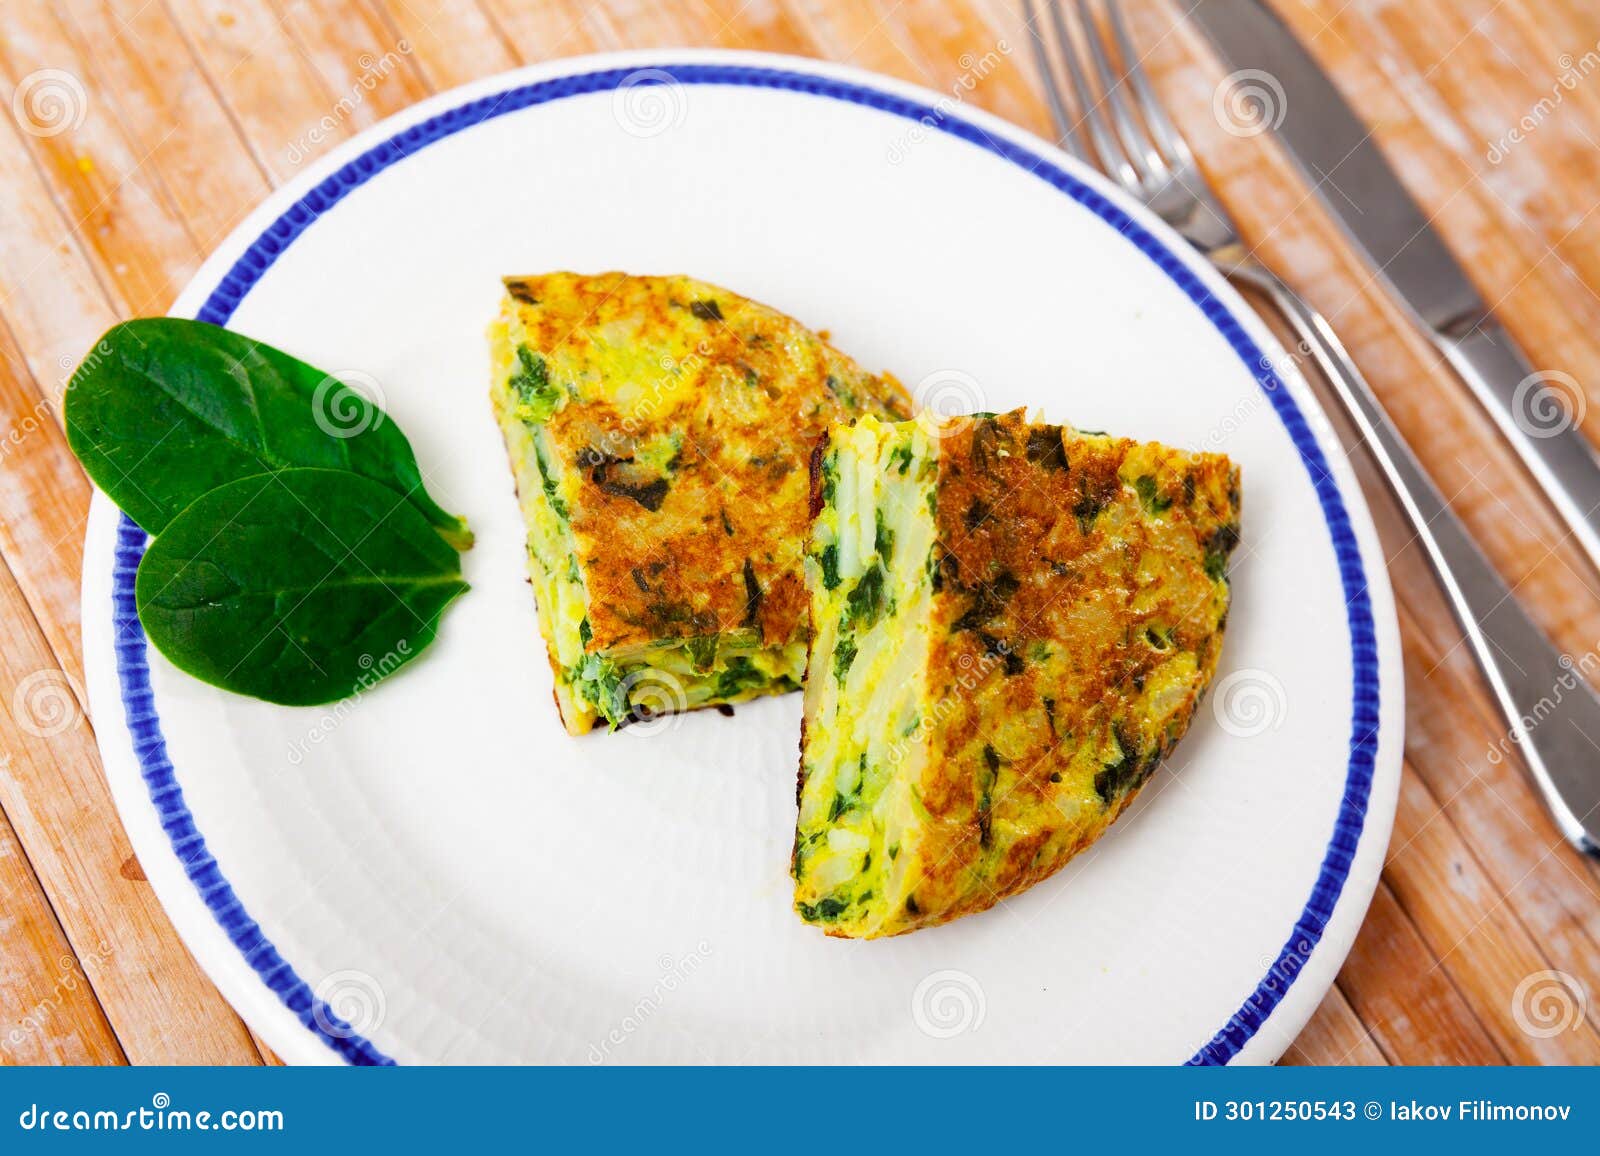 image of omelette with spinach